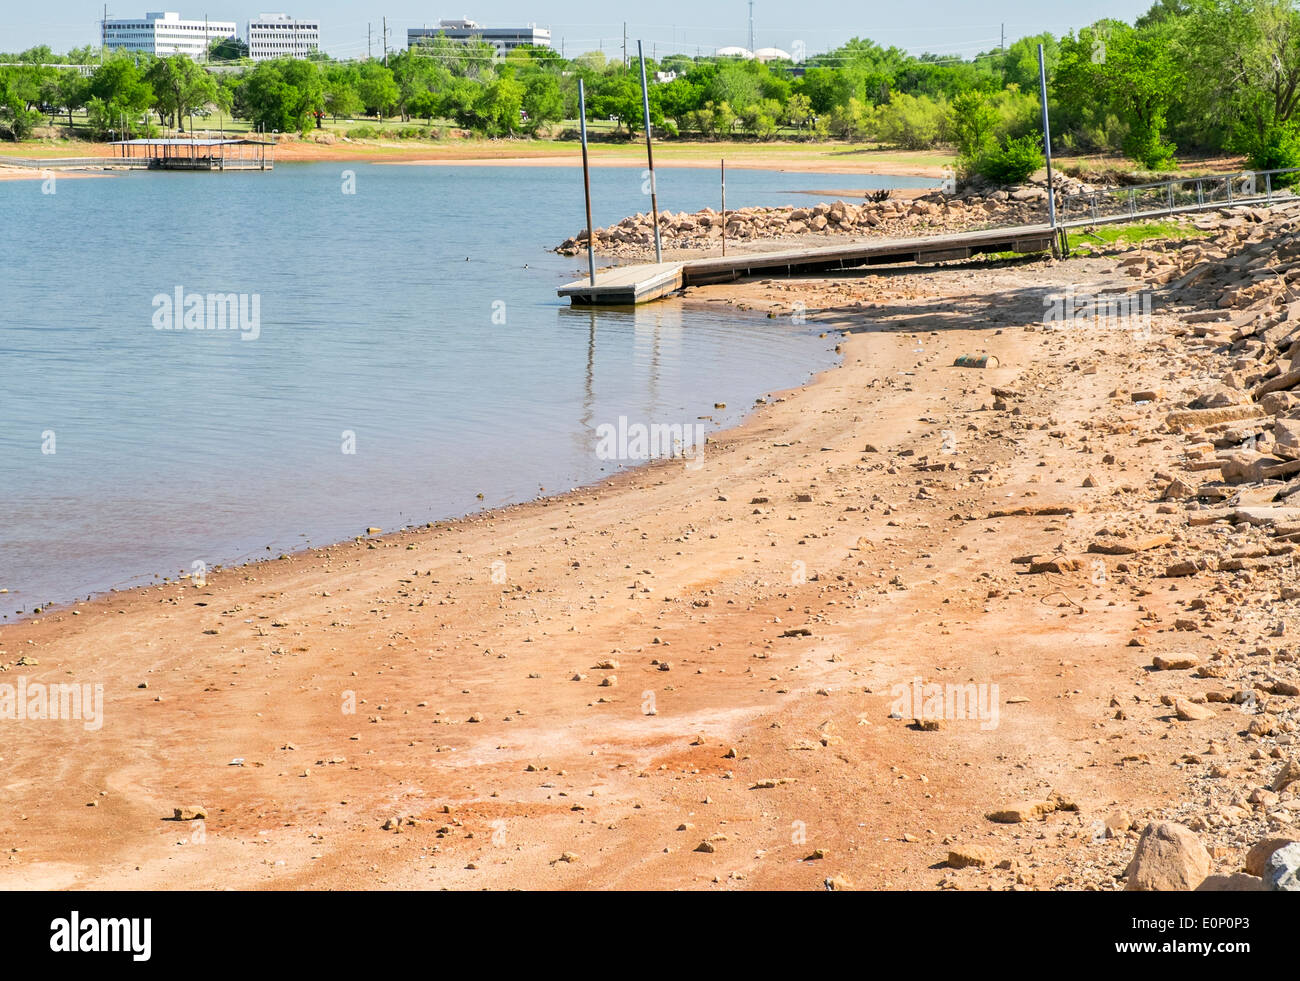 A severe drought in Oklahoma 2014 causes low lake levels at Lake Hefner in Oklahoma City, Oklahoma, USA. Stock Photo